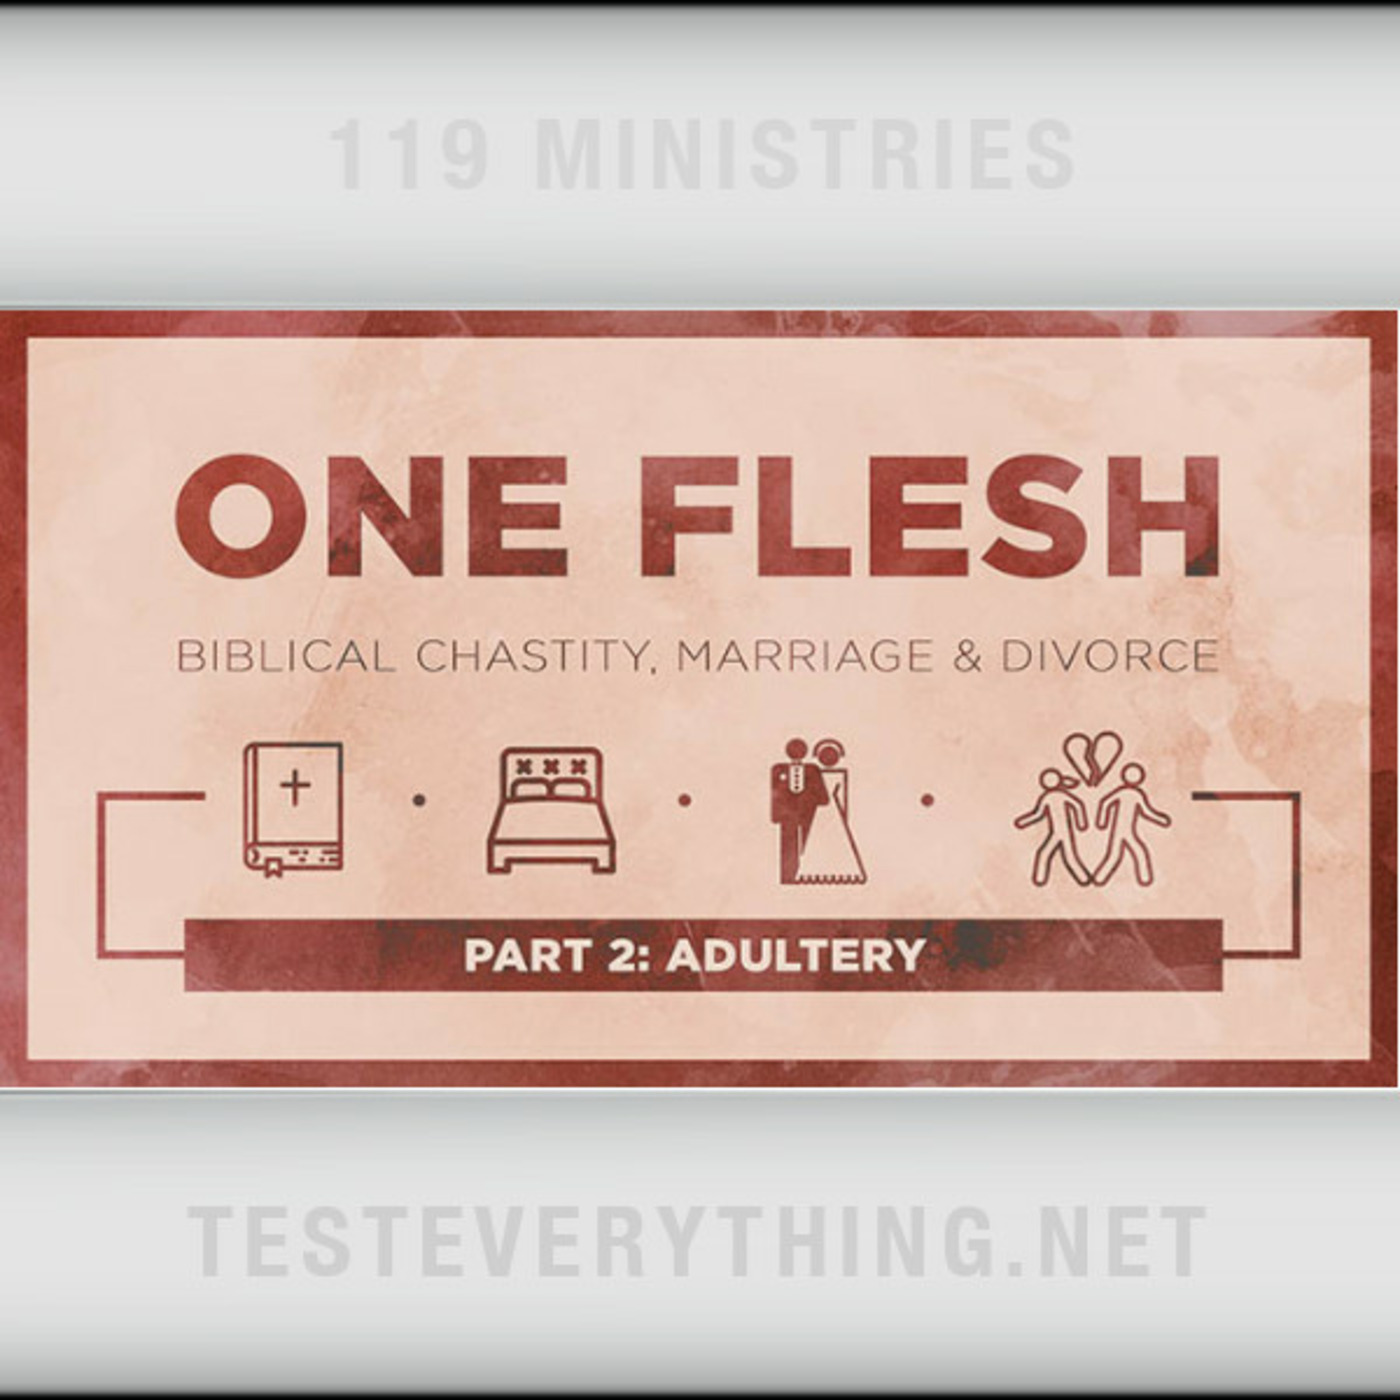 Episode 547: One Flesh - Biblical Chastity, Marriage & Divorce - Part 2 - Adultery